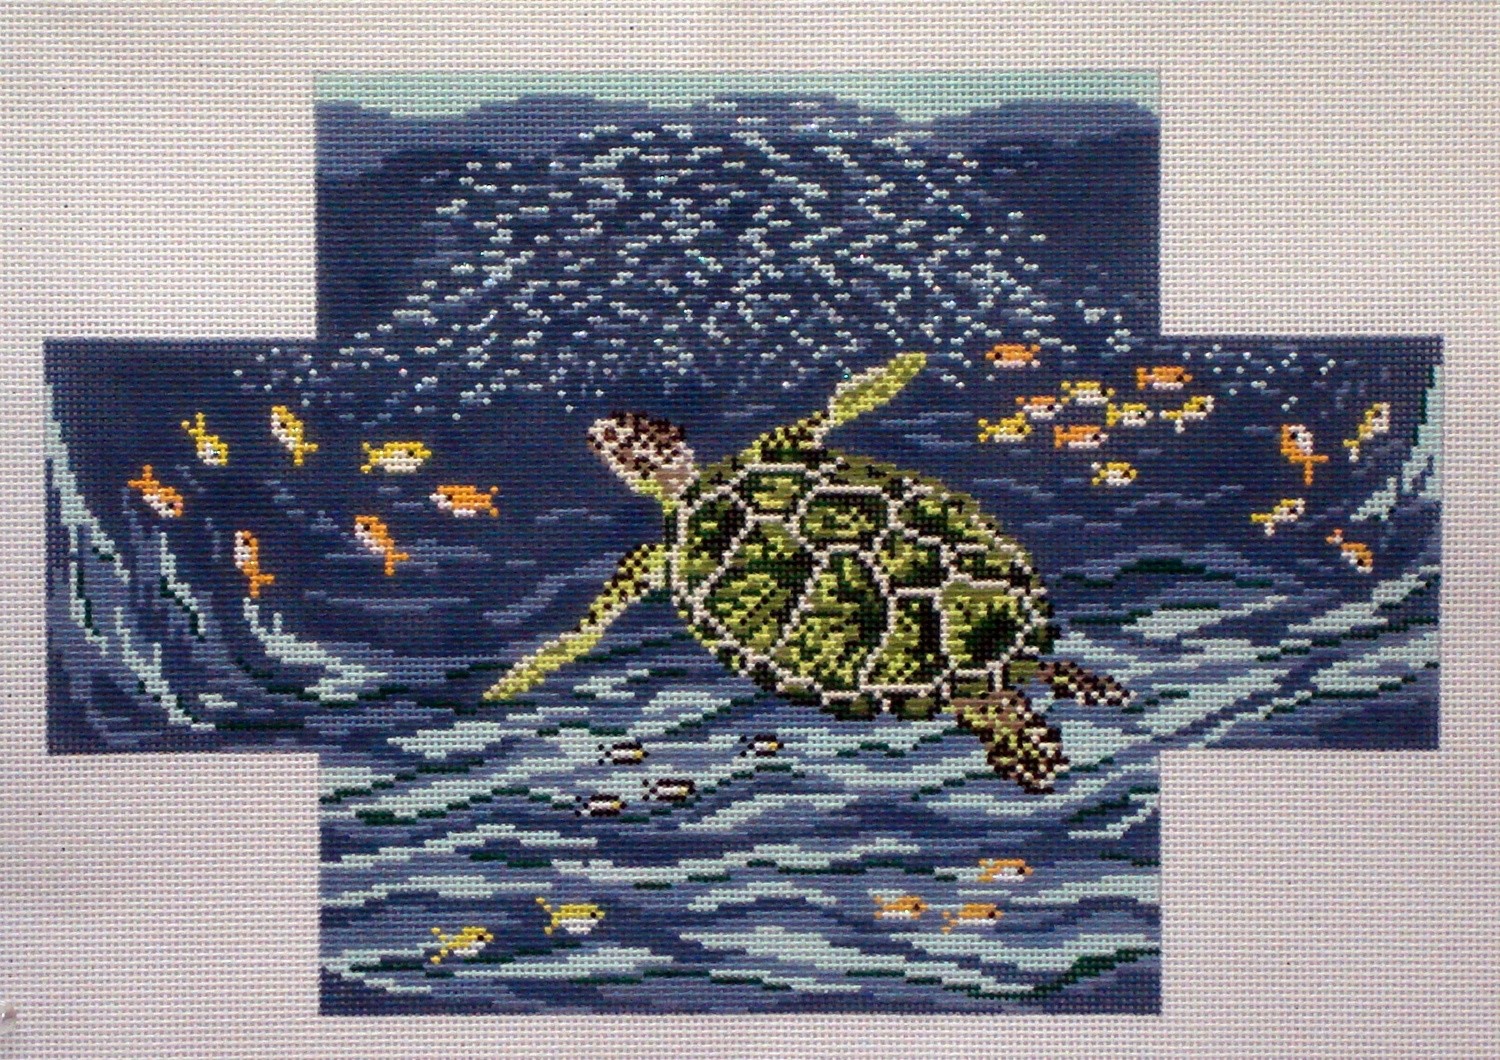 Sea Turtle Brick Cover      (handpainted by Needle Crossing)*Product may take longer than usual to arrive*